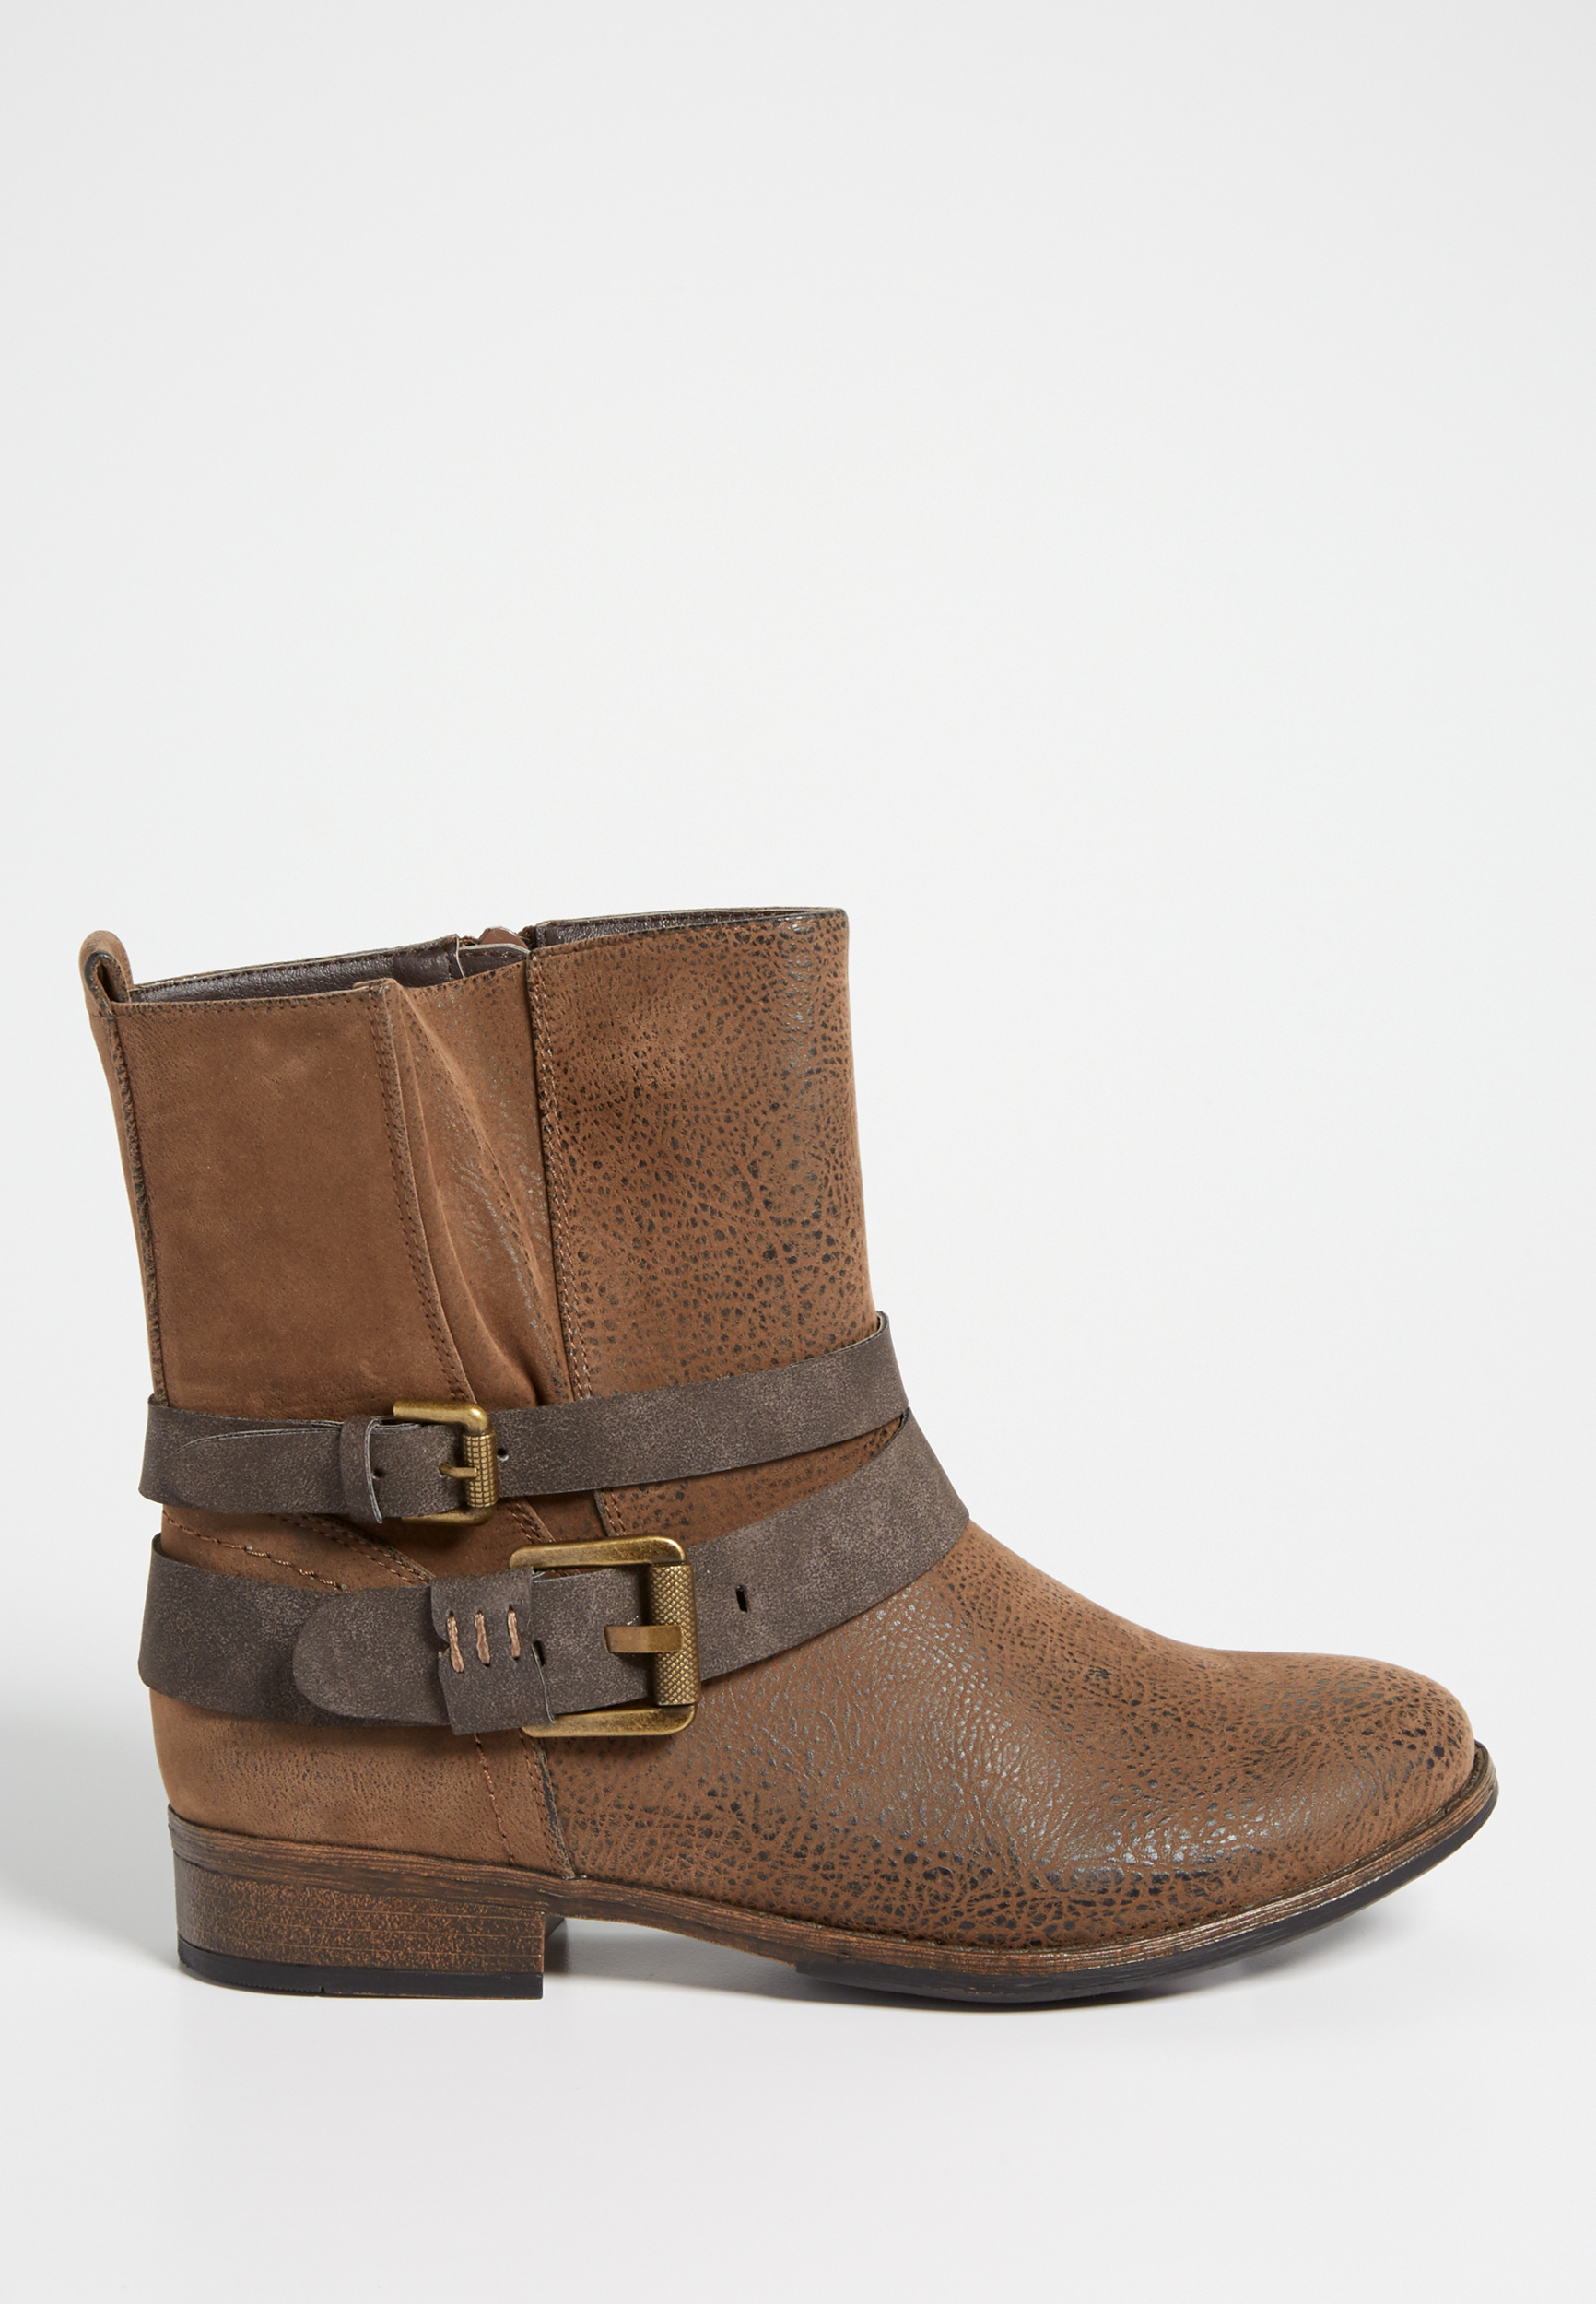 Jackie faux leather boot with buckles in brown | maurices